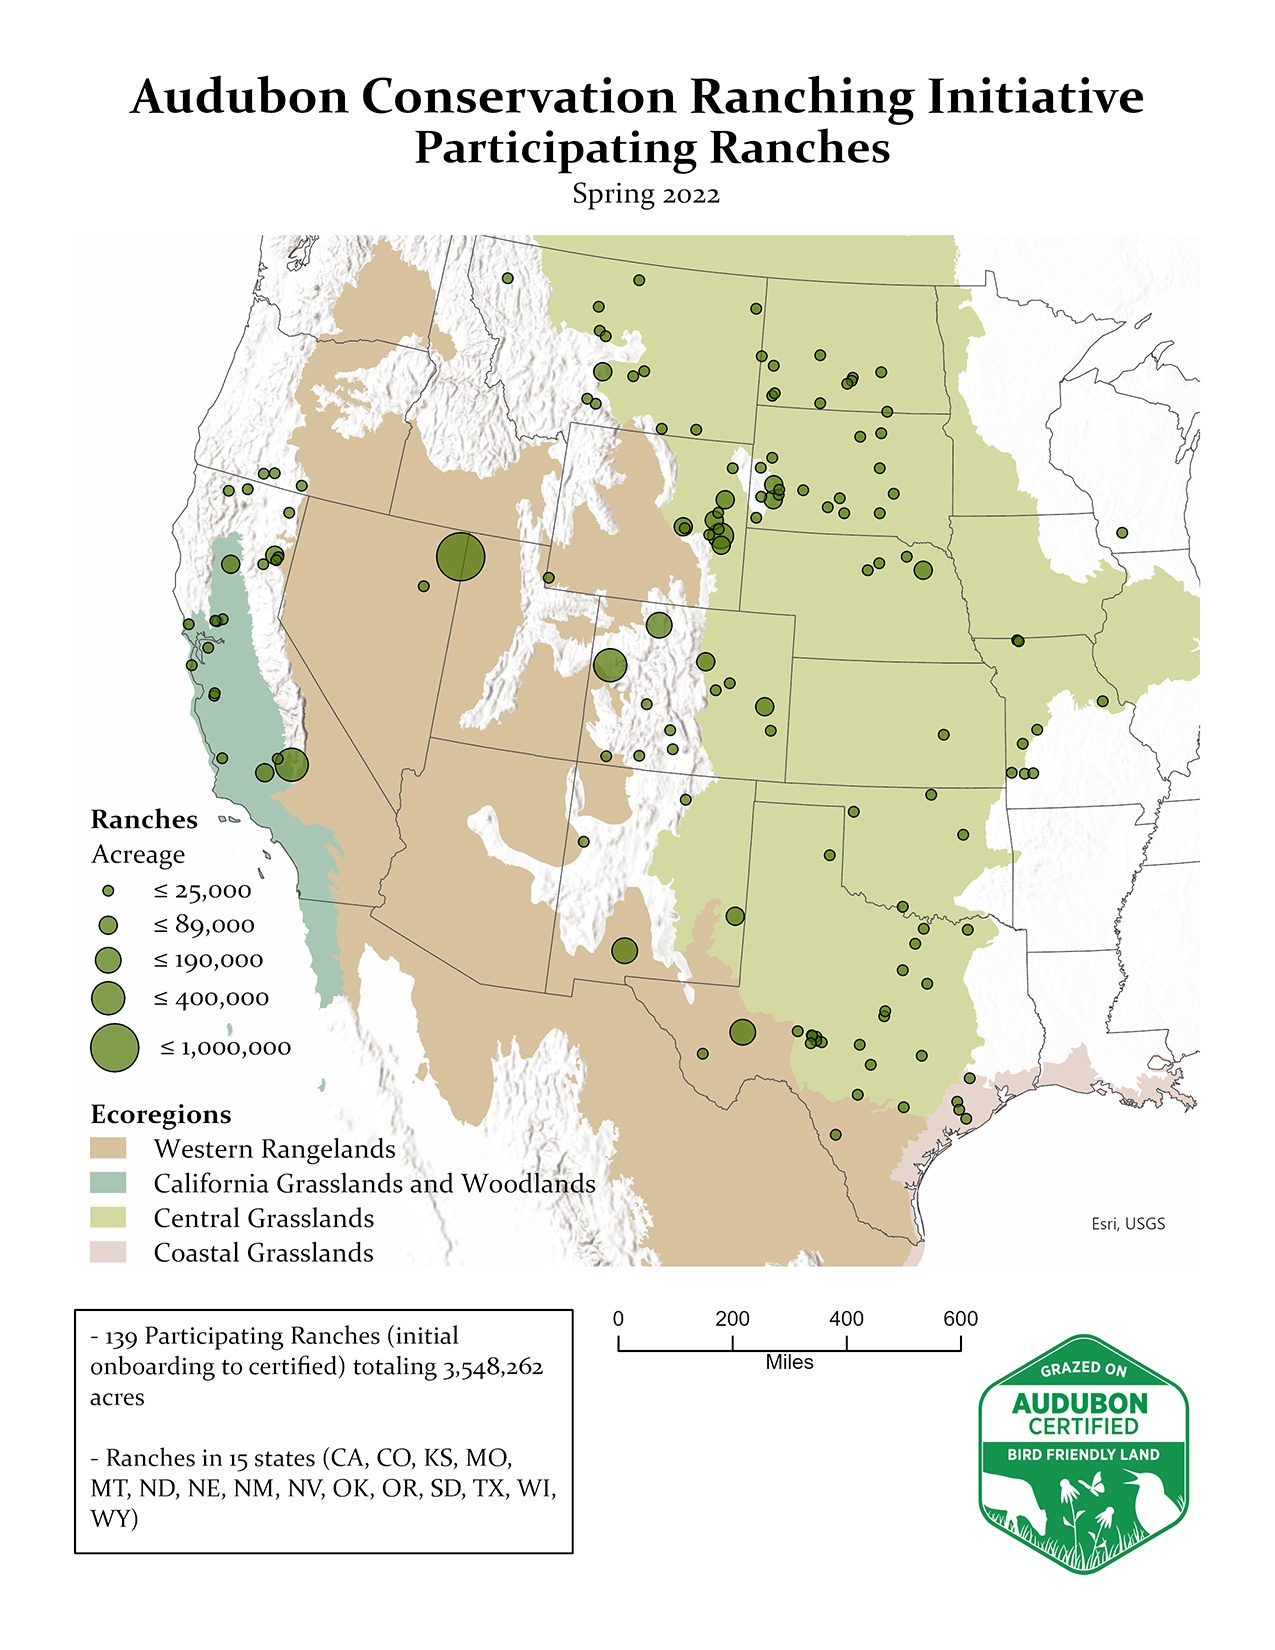 A map of Audubon conservation ranching initiative sites and their participating ranches in the western united states April 2022.